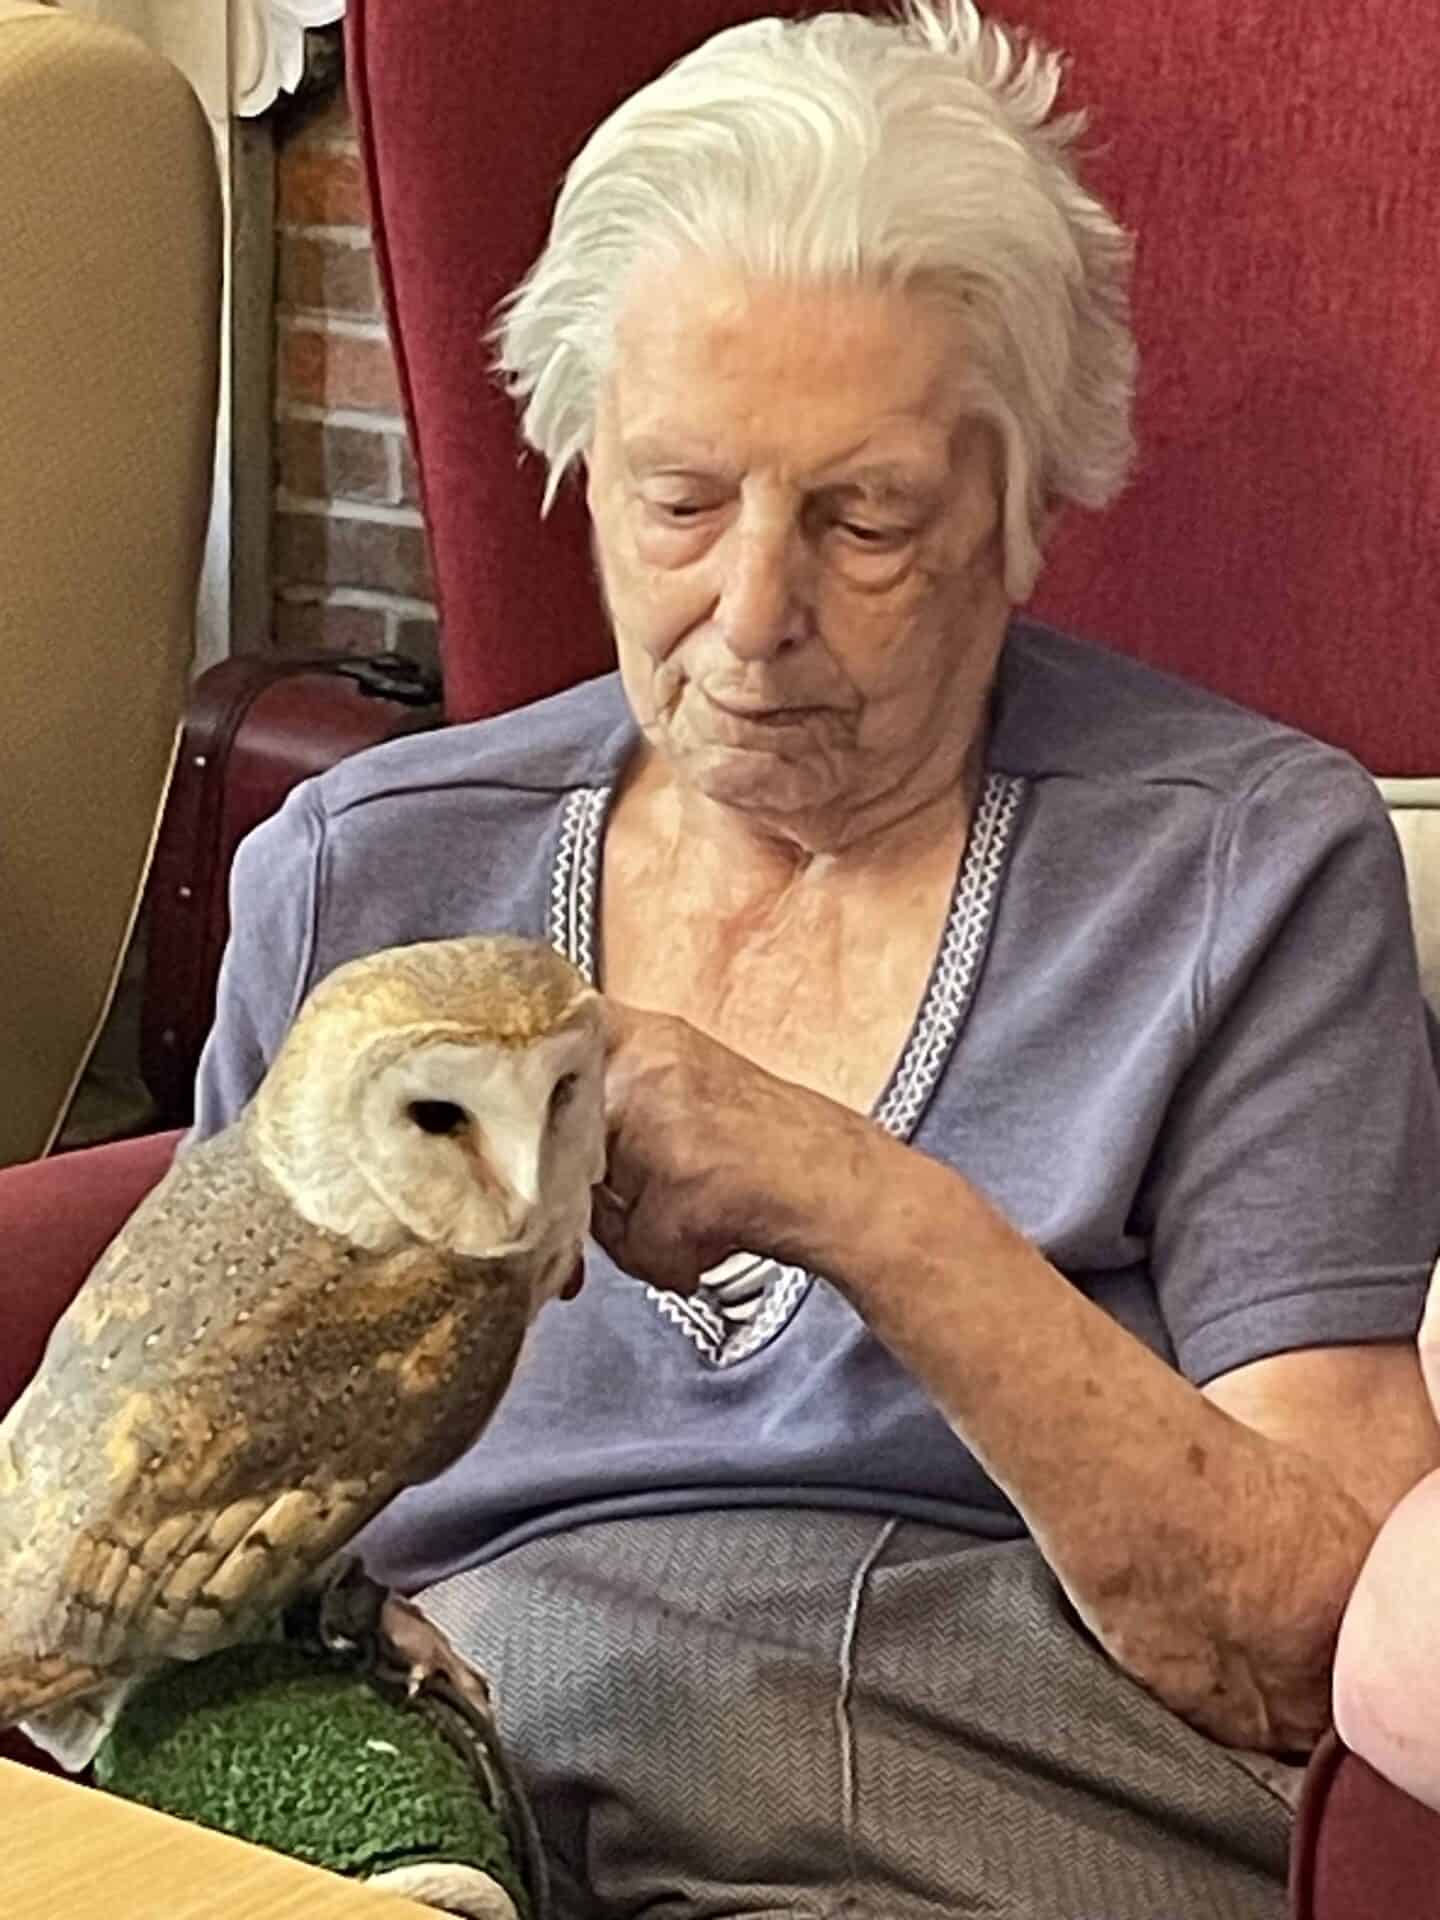 An elderly person sitting in an armchair shares a gentle moment with a perched owl during its visit, conveying a sense of serenity and companionship between human and bird.